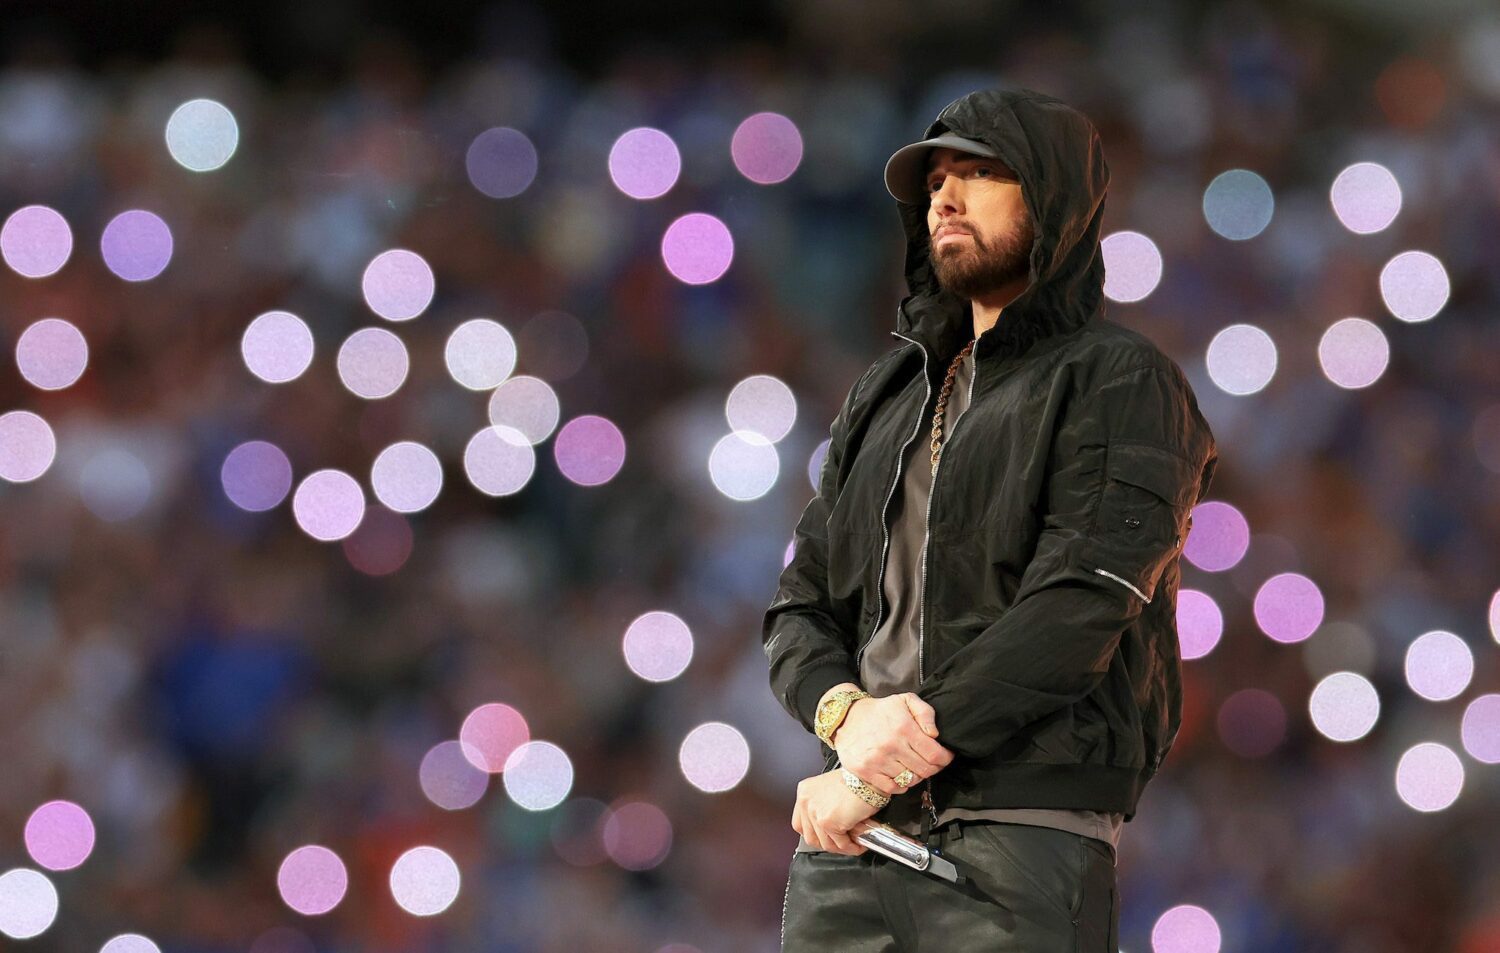 INGLEWOOD, CALIFORNIA - FEBRUARY 13: Eminem performs during the Pepsi Super Bowl LVI Halftime Show at SoFi Stadium on February 13, 2022 in Inglewood, California. (Photo by Kevin C. Cox/Getty Images)